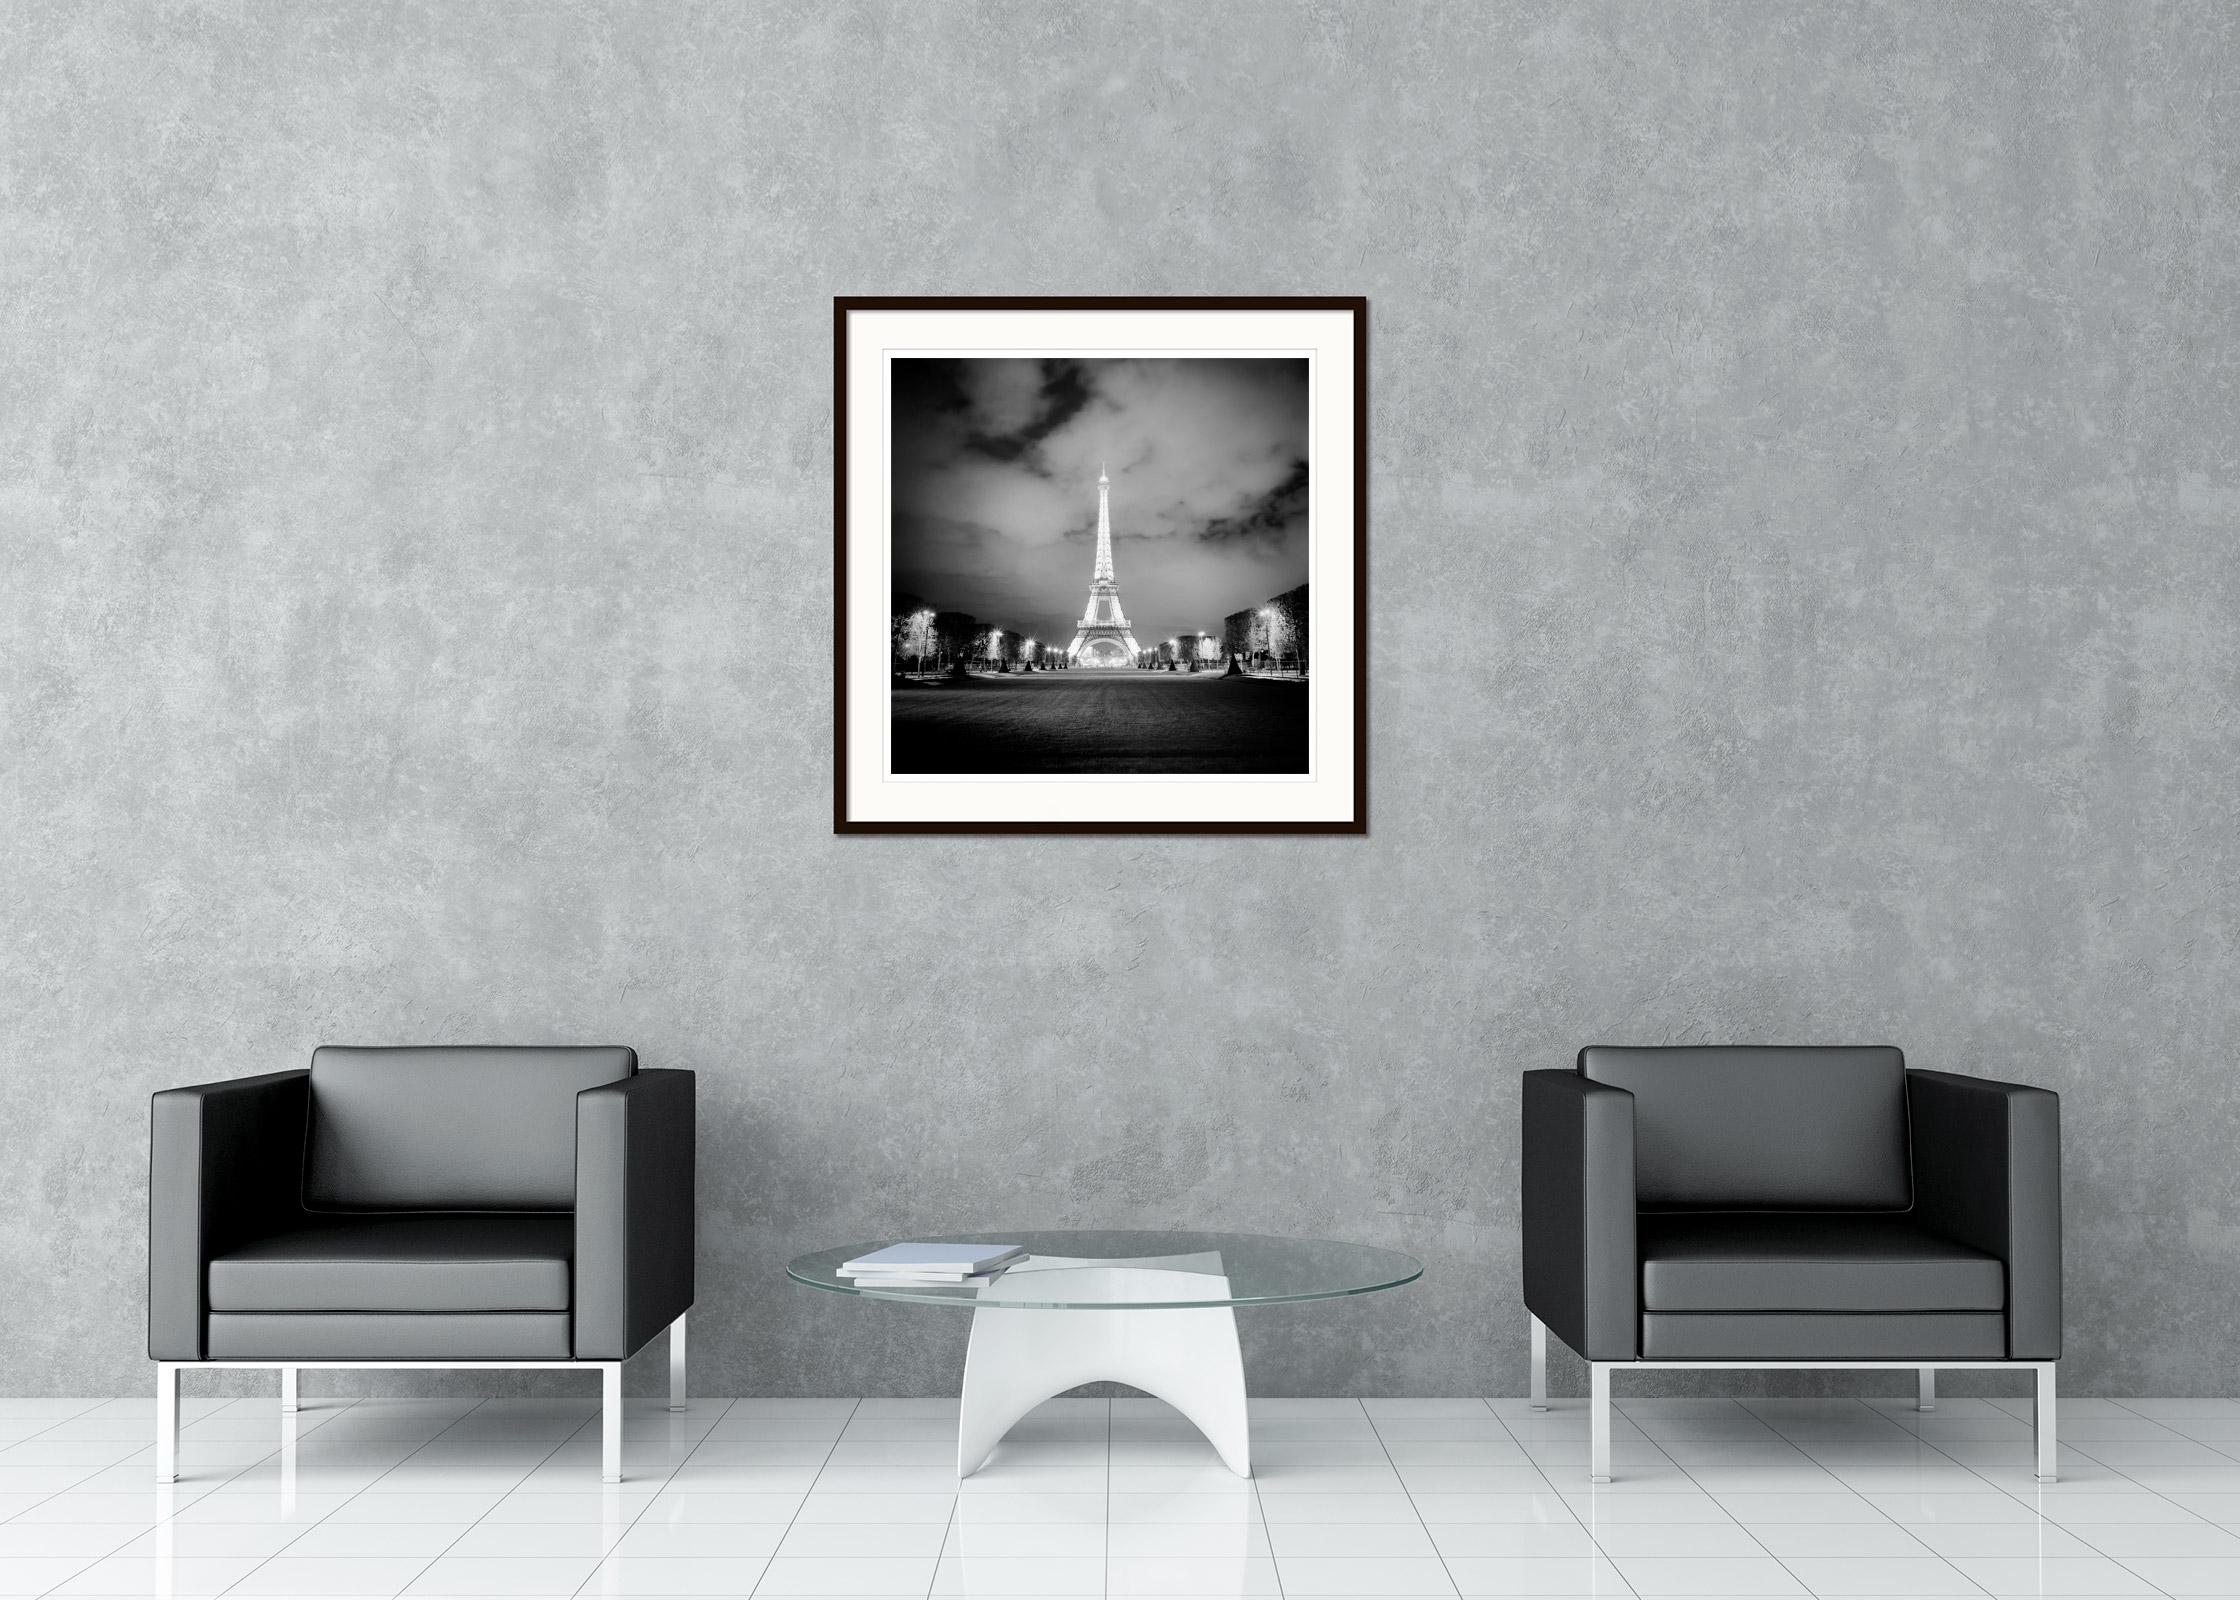 Black and white fine art cityscape - landscape night photography. Eiffel tower at night with light show, Paris, France. Archival pigment ink print, edition of 9. Signed, titled, dated and numbered by artist. Certificate of authenticity included.